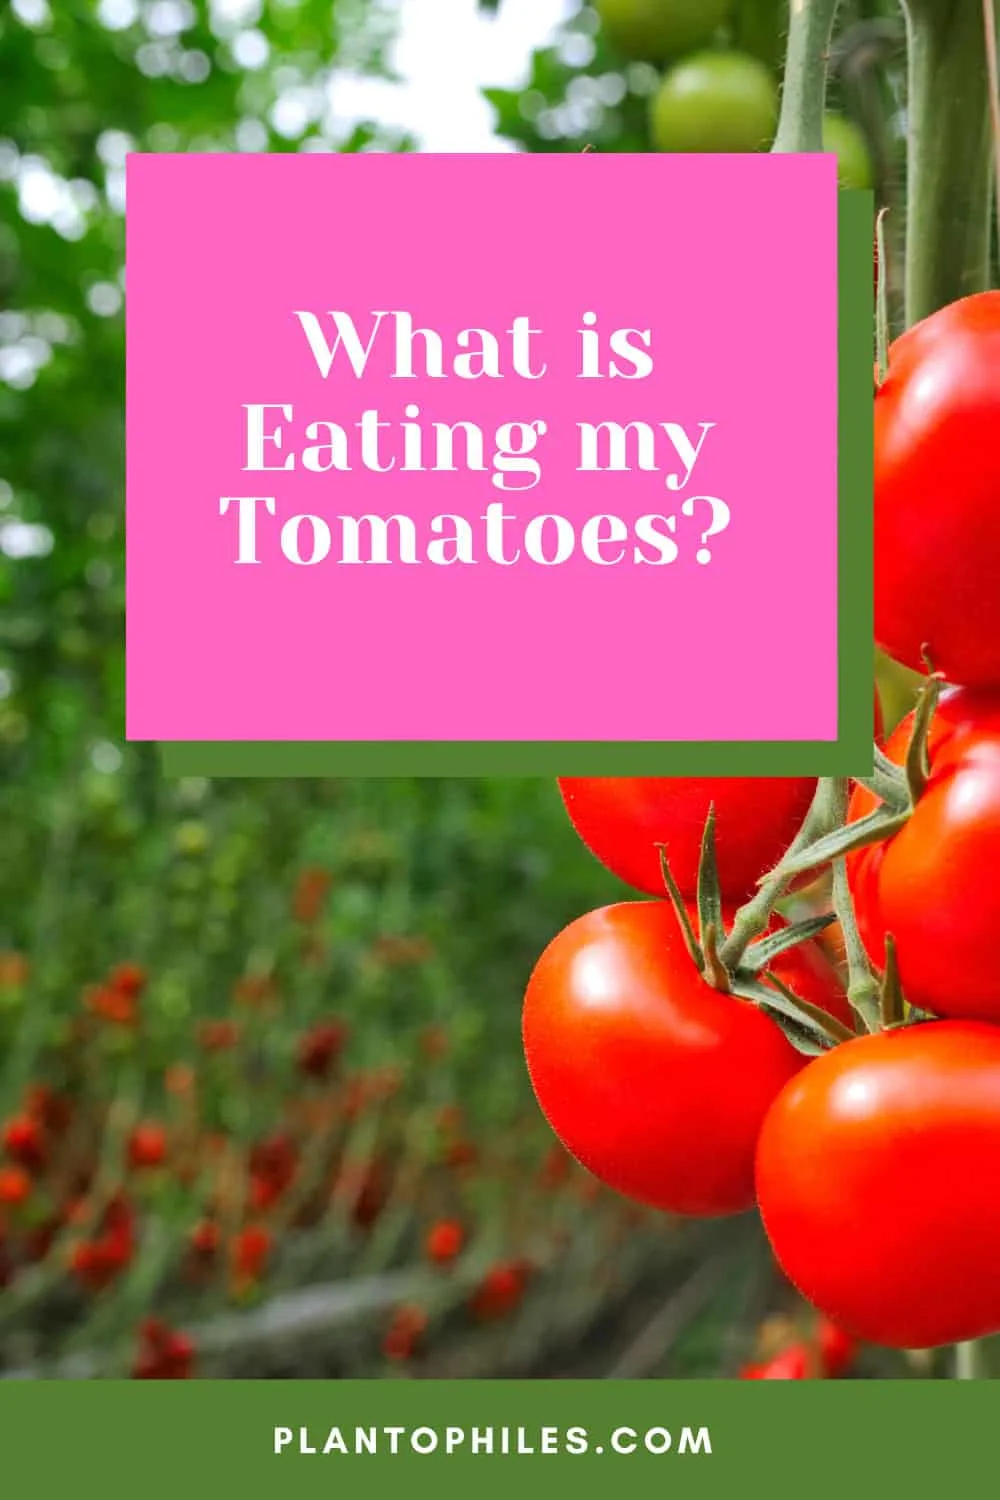 What is eating my tomatoes?